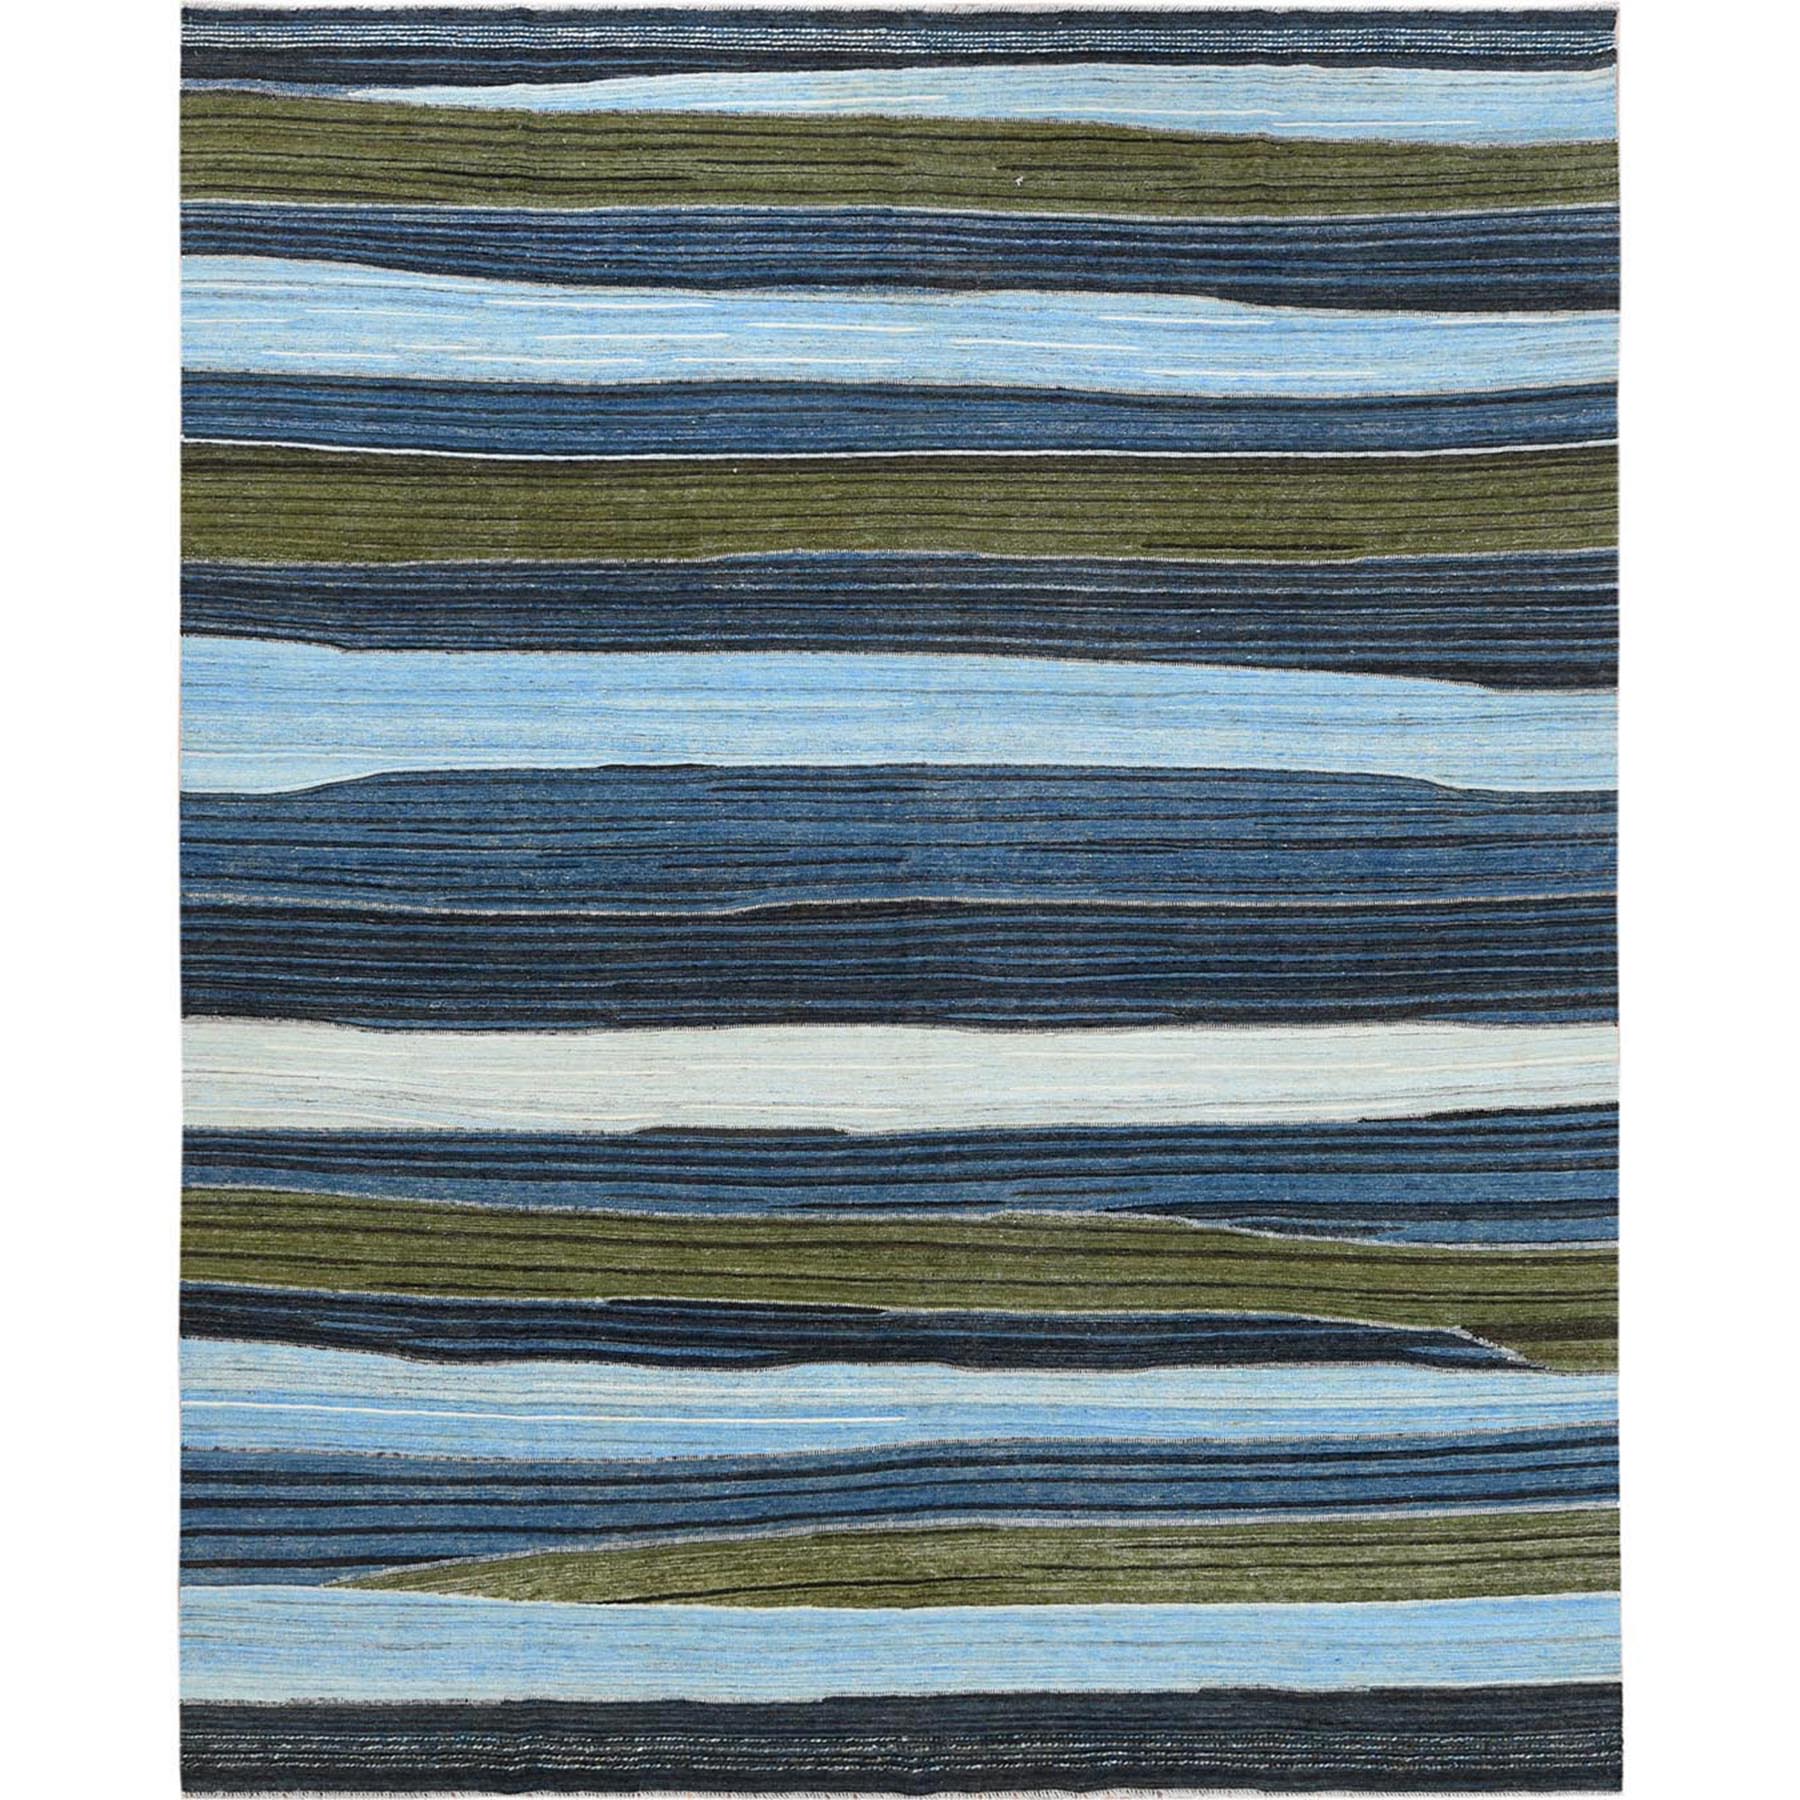 Modern & Contemporary Wool Hand-Woven Area Rug 9'7